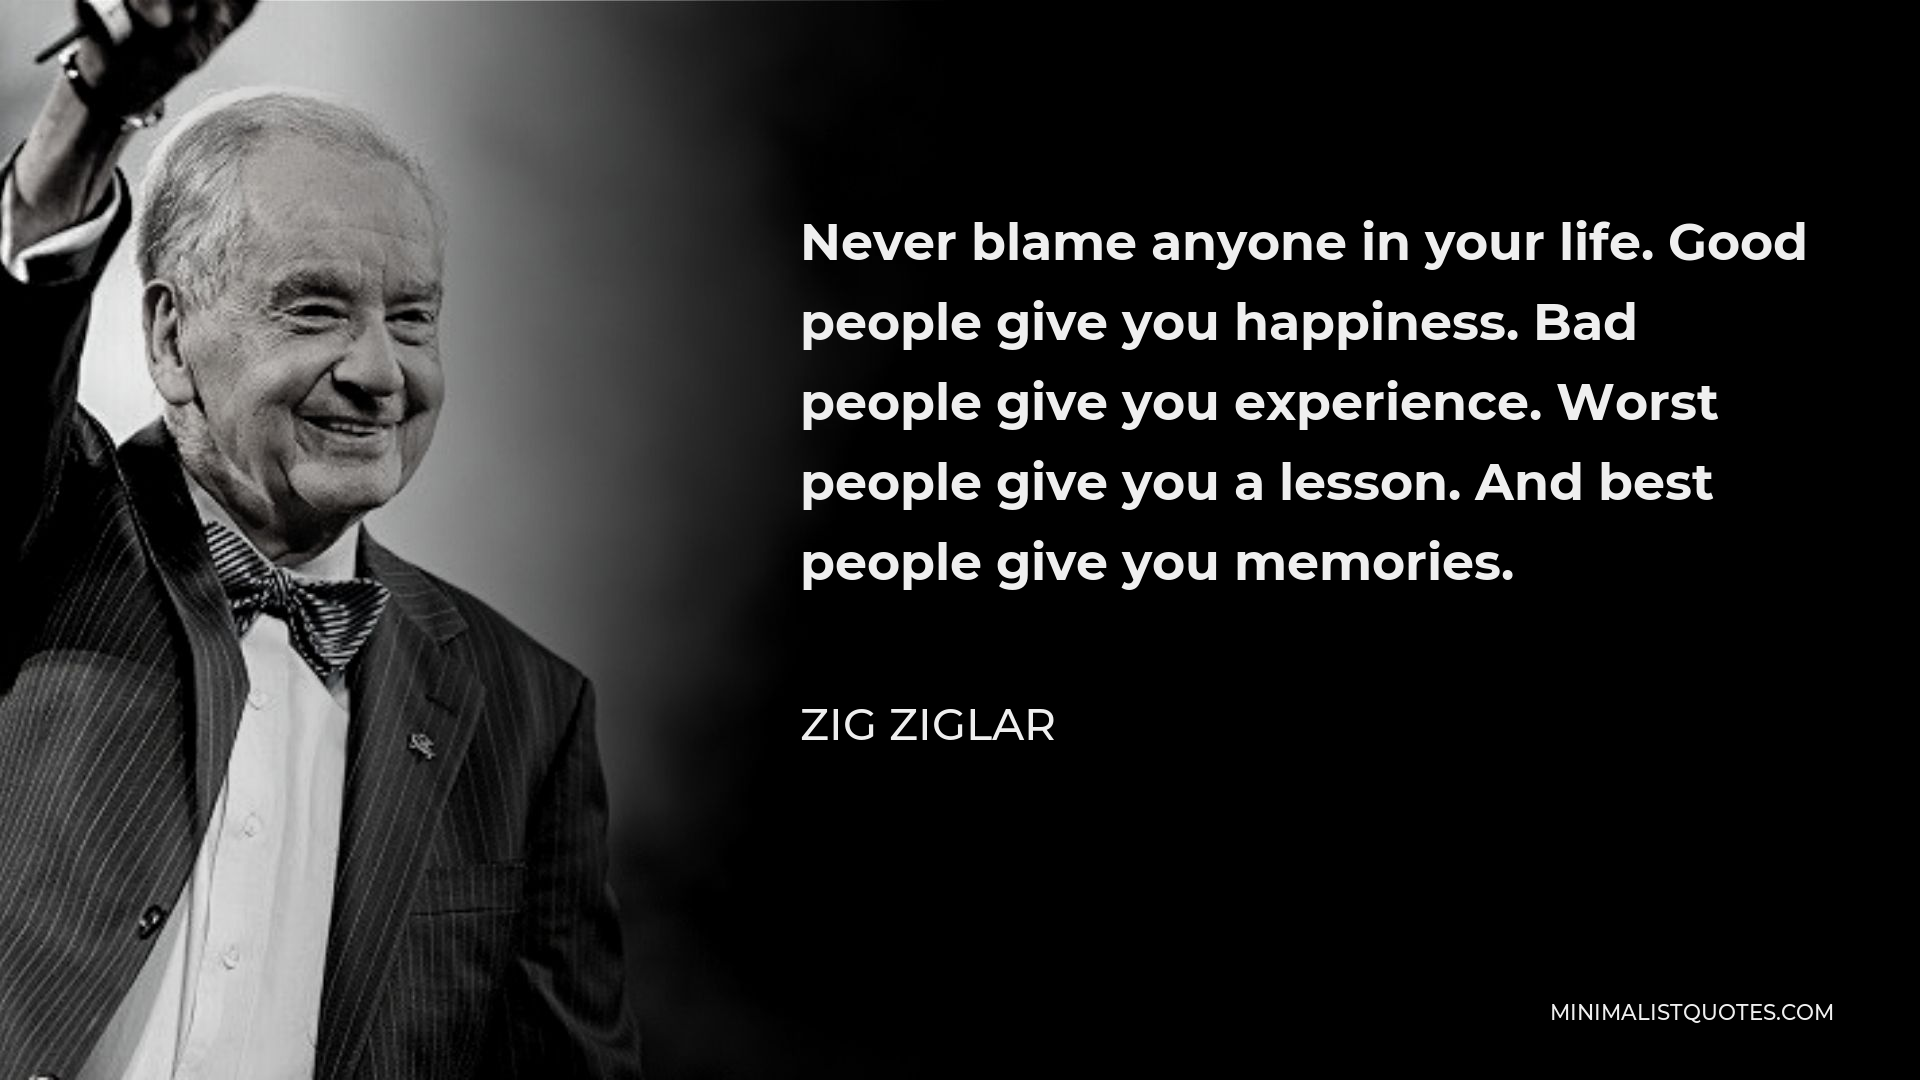 Zig Ziglar Quote - Never blame anyone in your life. Good people give you happiness. Bad people give you experience. Worst people give you a lesson. And best people give you memories.